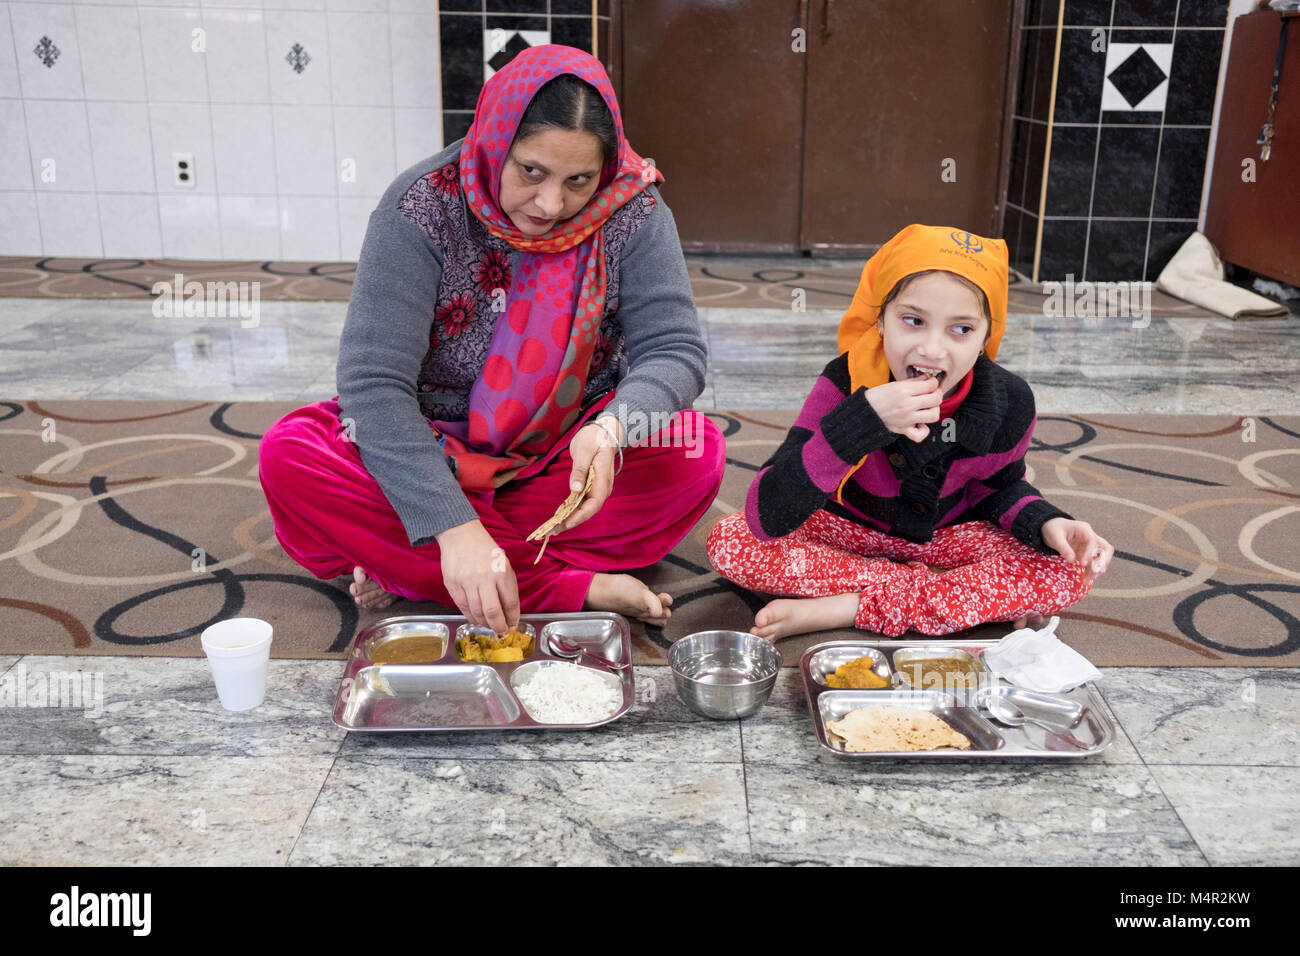 An Indian Sikh woman and her daughter eat together at the Baba Makhan Shah Lobana Sikh Center on 101 Avenue in Richmond Hill, Queens, New York City Stock Photo